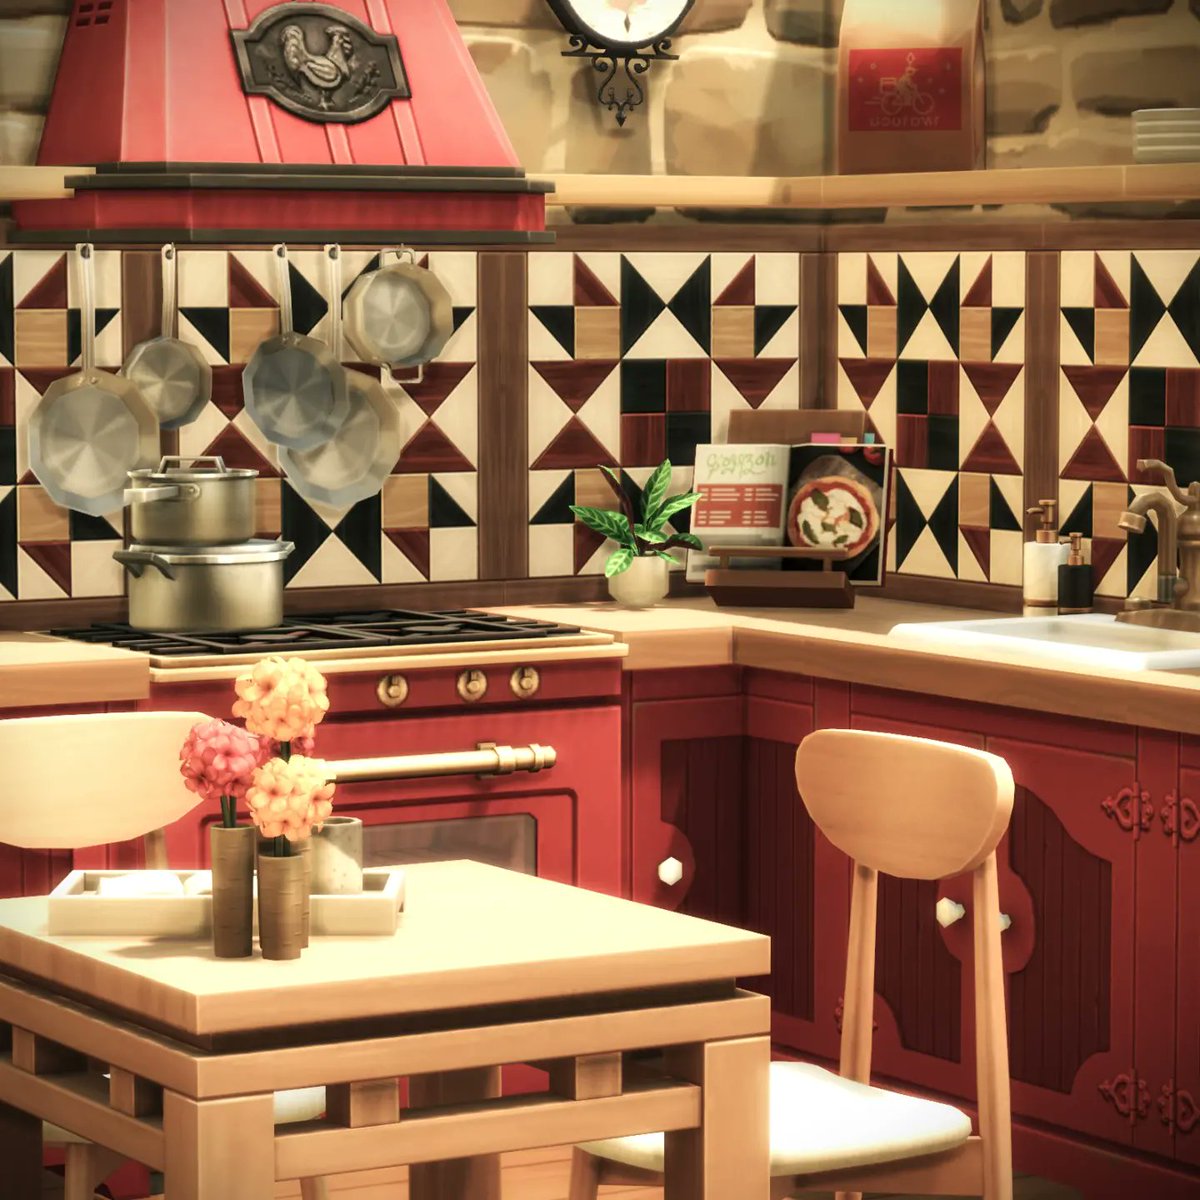 💕🌺Red Kitchen🌺💕 Hi Lovelies💗 Iam gonna show you this country kitchen, that I have made together with my lovely Mum💝 We hope you like it! 💐 Download in my Gallery! EA ID #Juliee86 #sims #ts4 #Sims4 #ShowUsYourBuilds